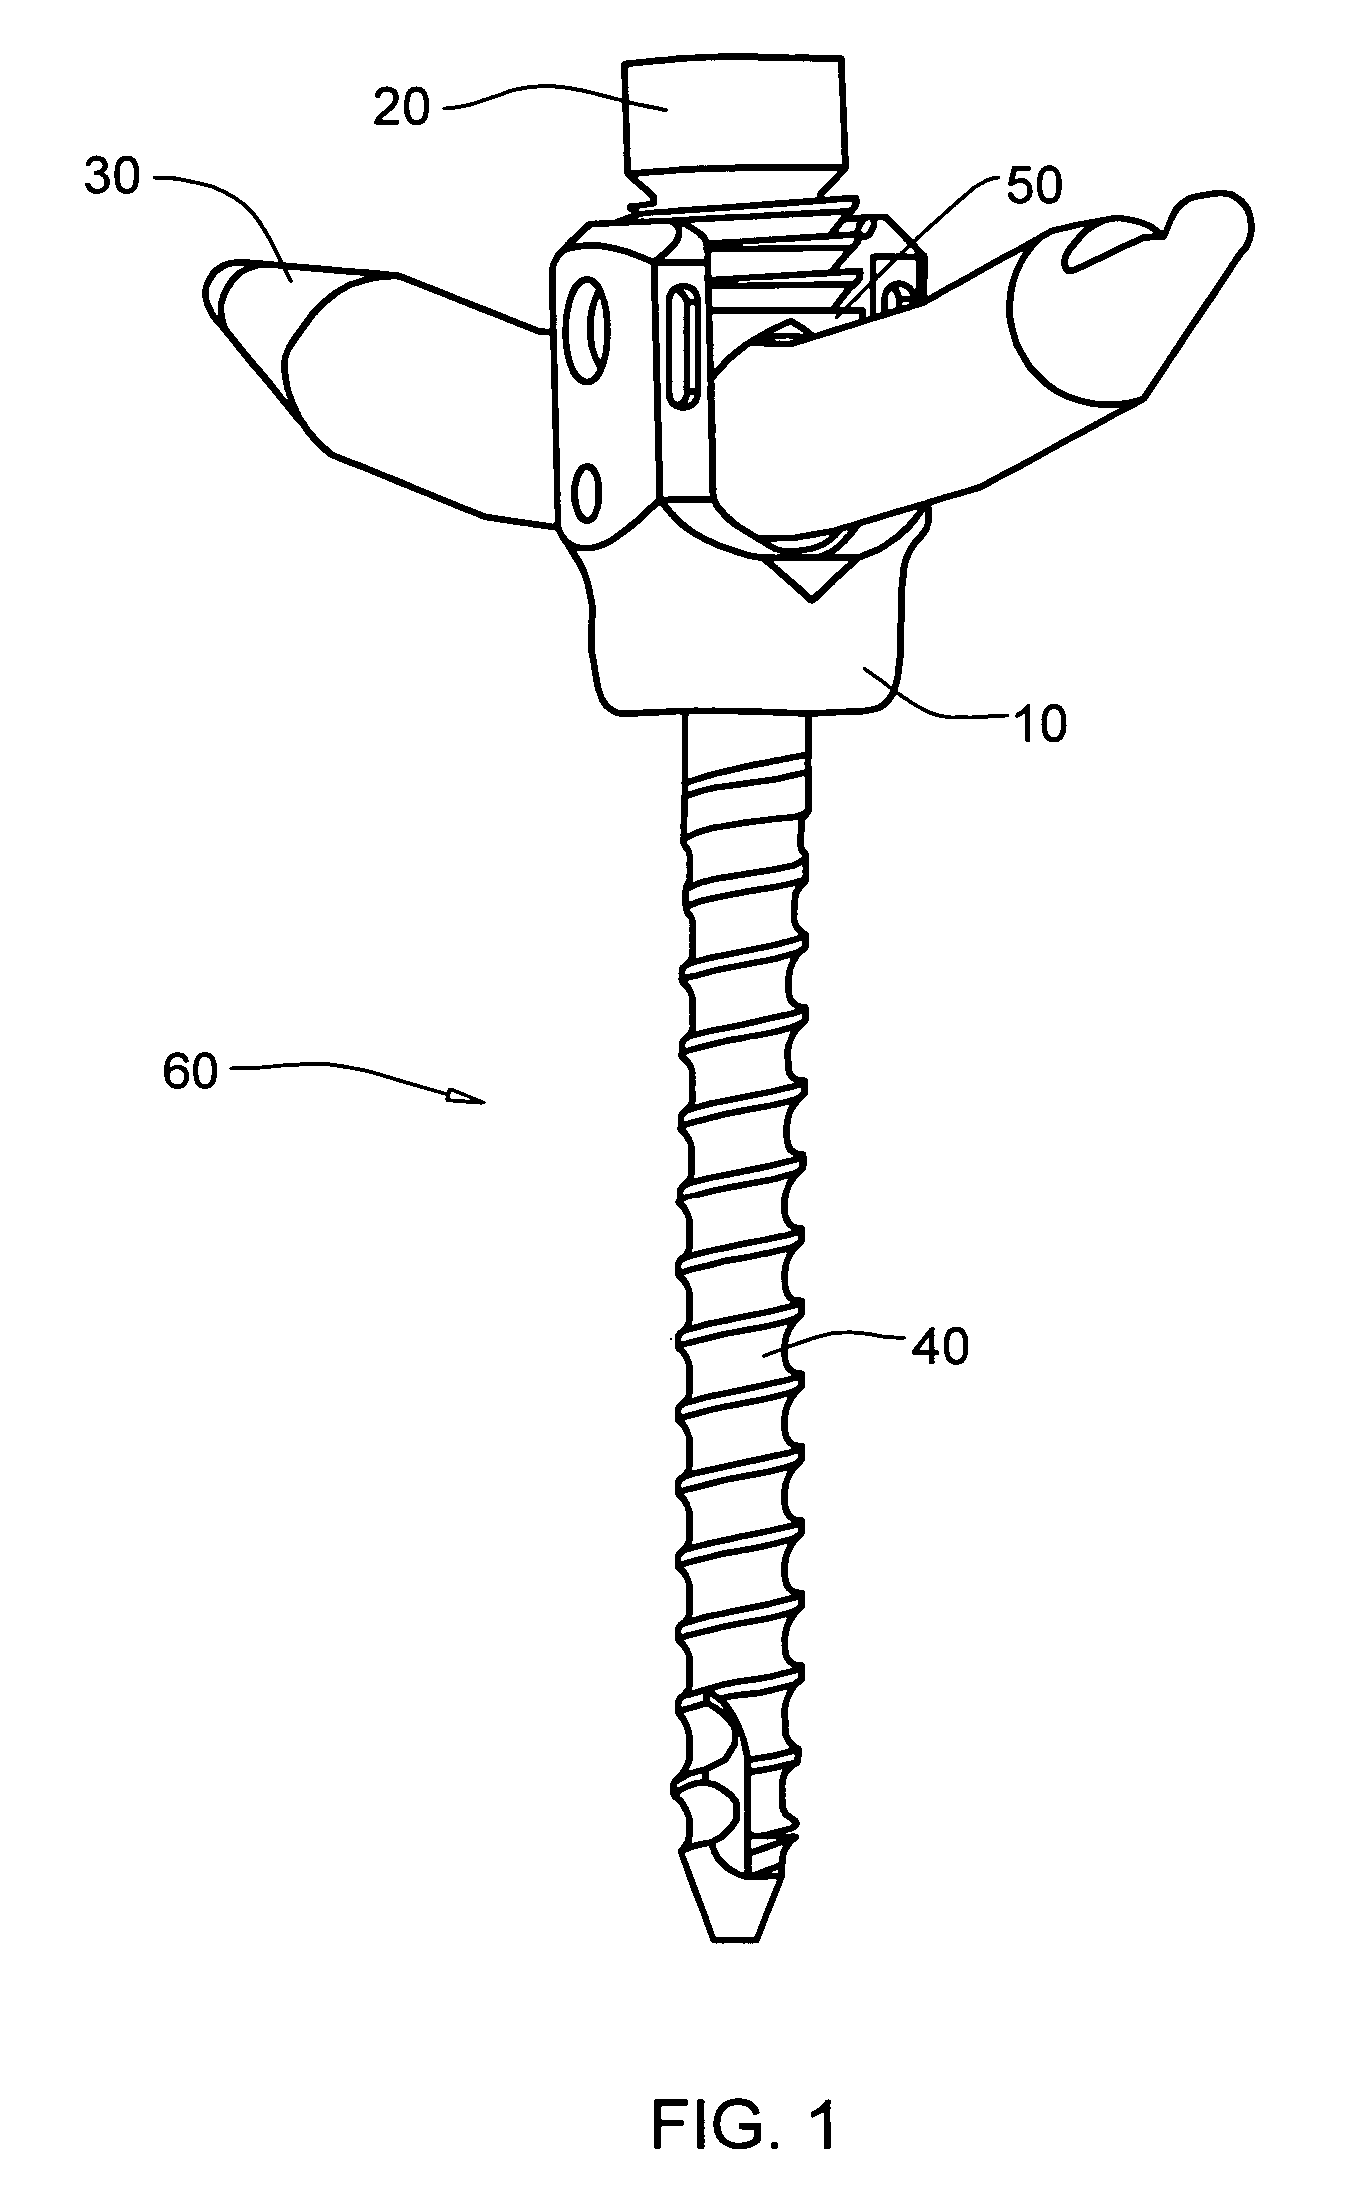 Locking device and method, for use in a bone stabilization system, employing a set screw member and deformable saddle member